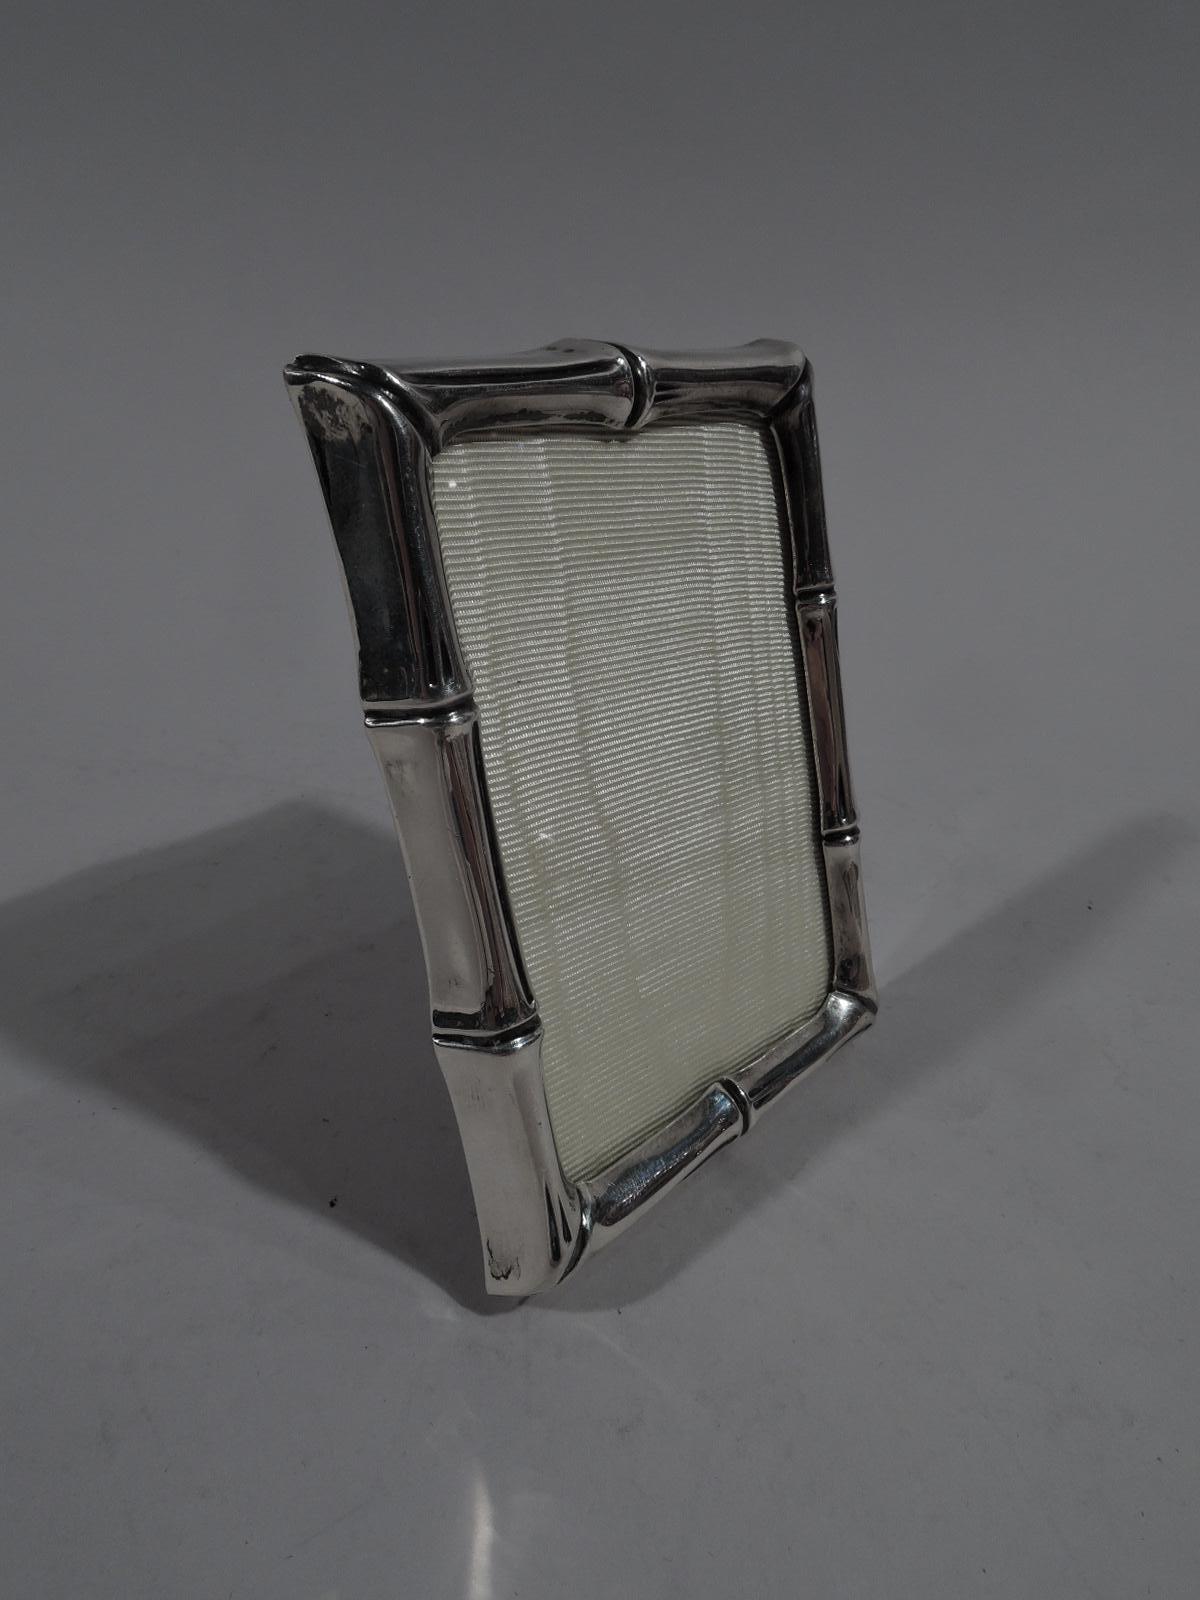 Mid-Century Modern sterling silver novelty picture frame. Made by Tiffany & Co. in New York. Rectangular window in bamboo-style surround. With glass, silk lining, laminate back, and fixed sterling silver support. For portrait (vertical) display.